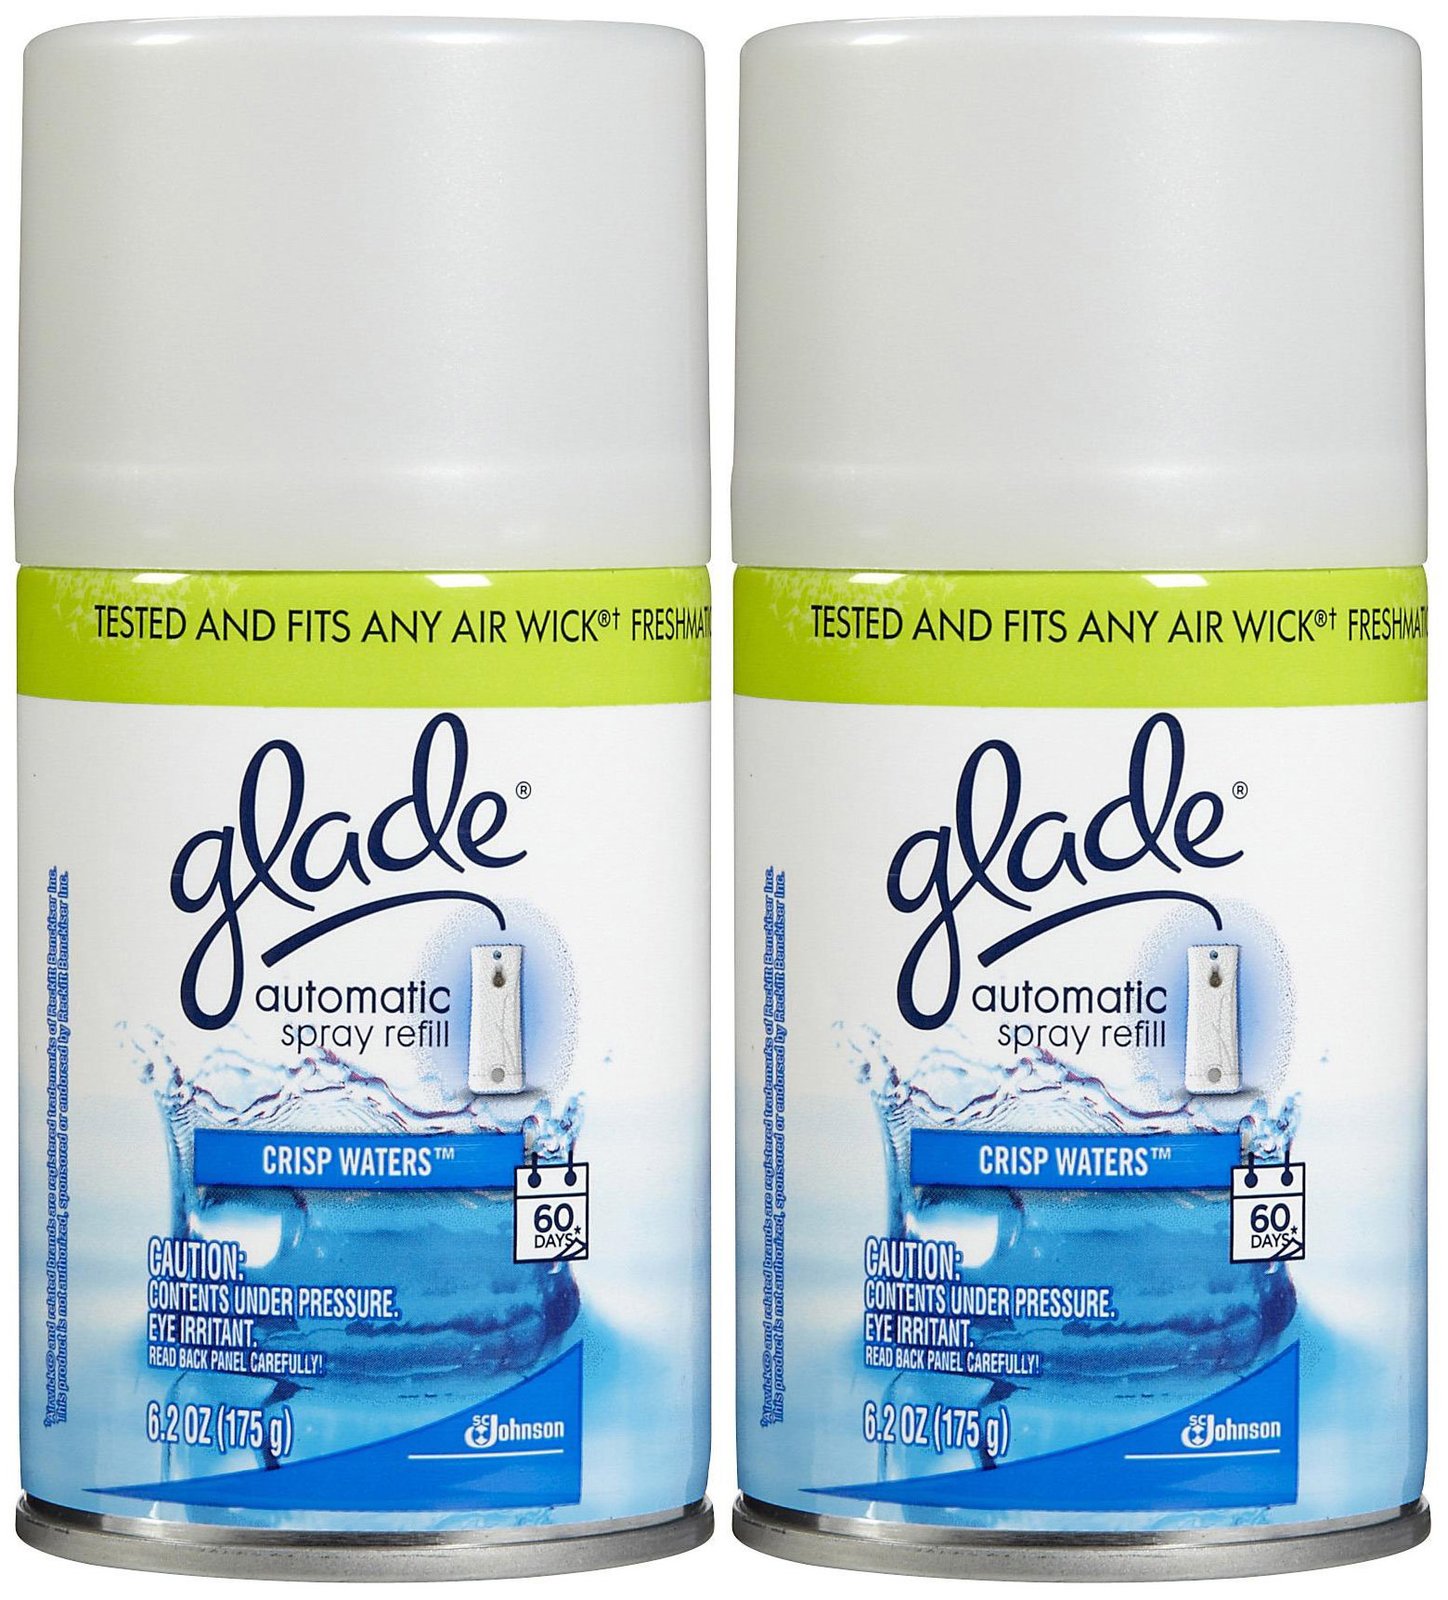 Glade Automatic Spray Refill Only $0.49 at Walgreens (1/18-1/20)